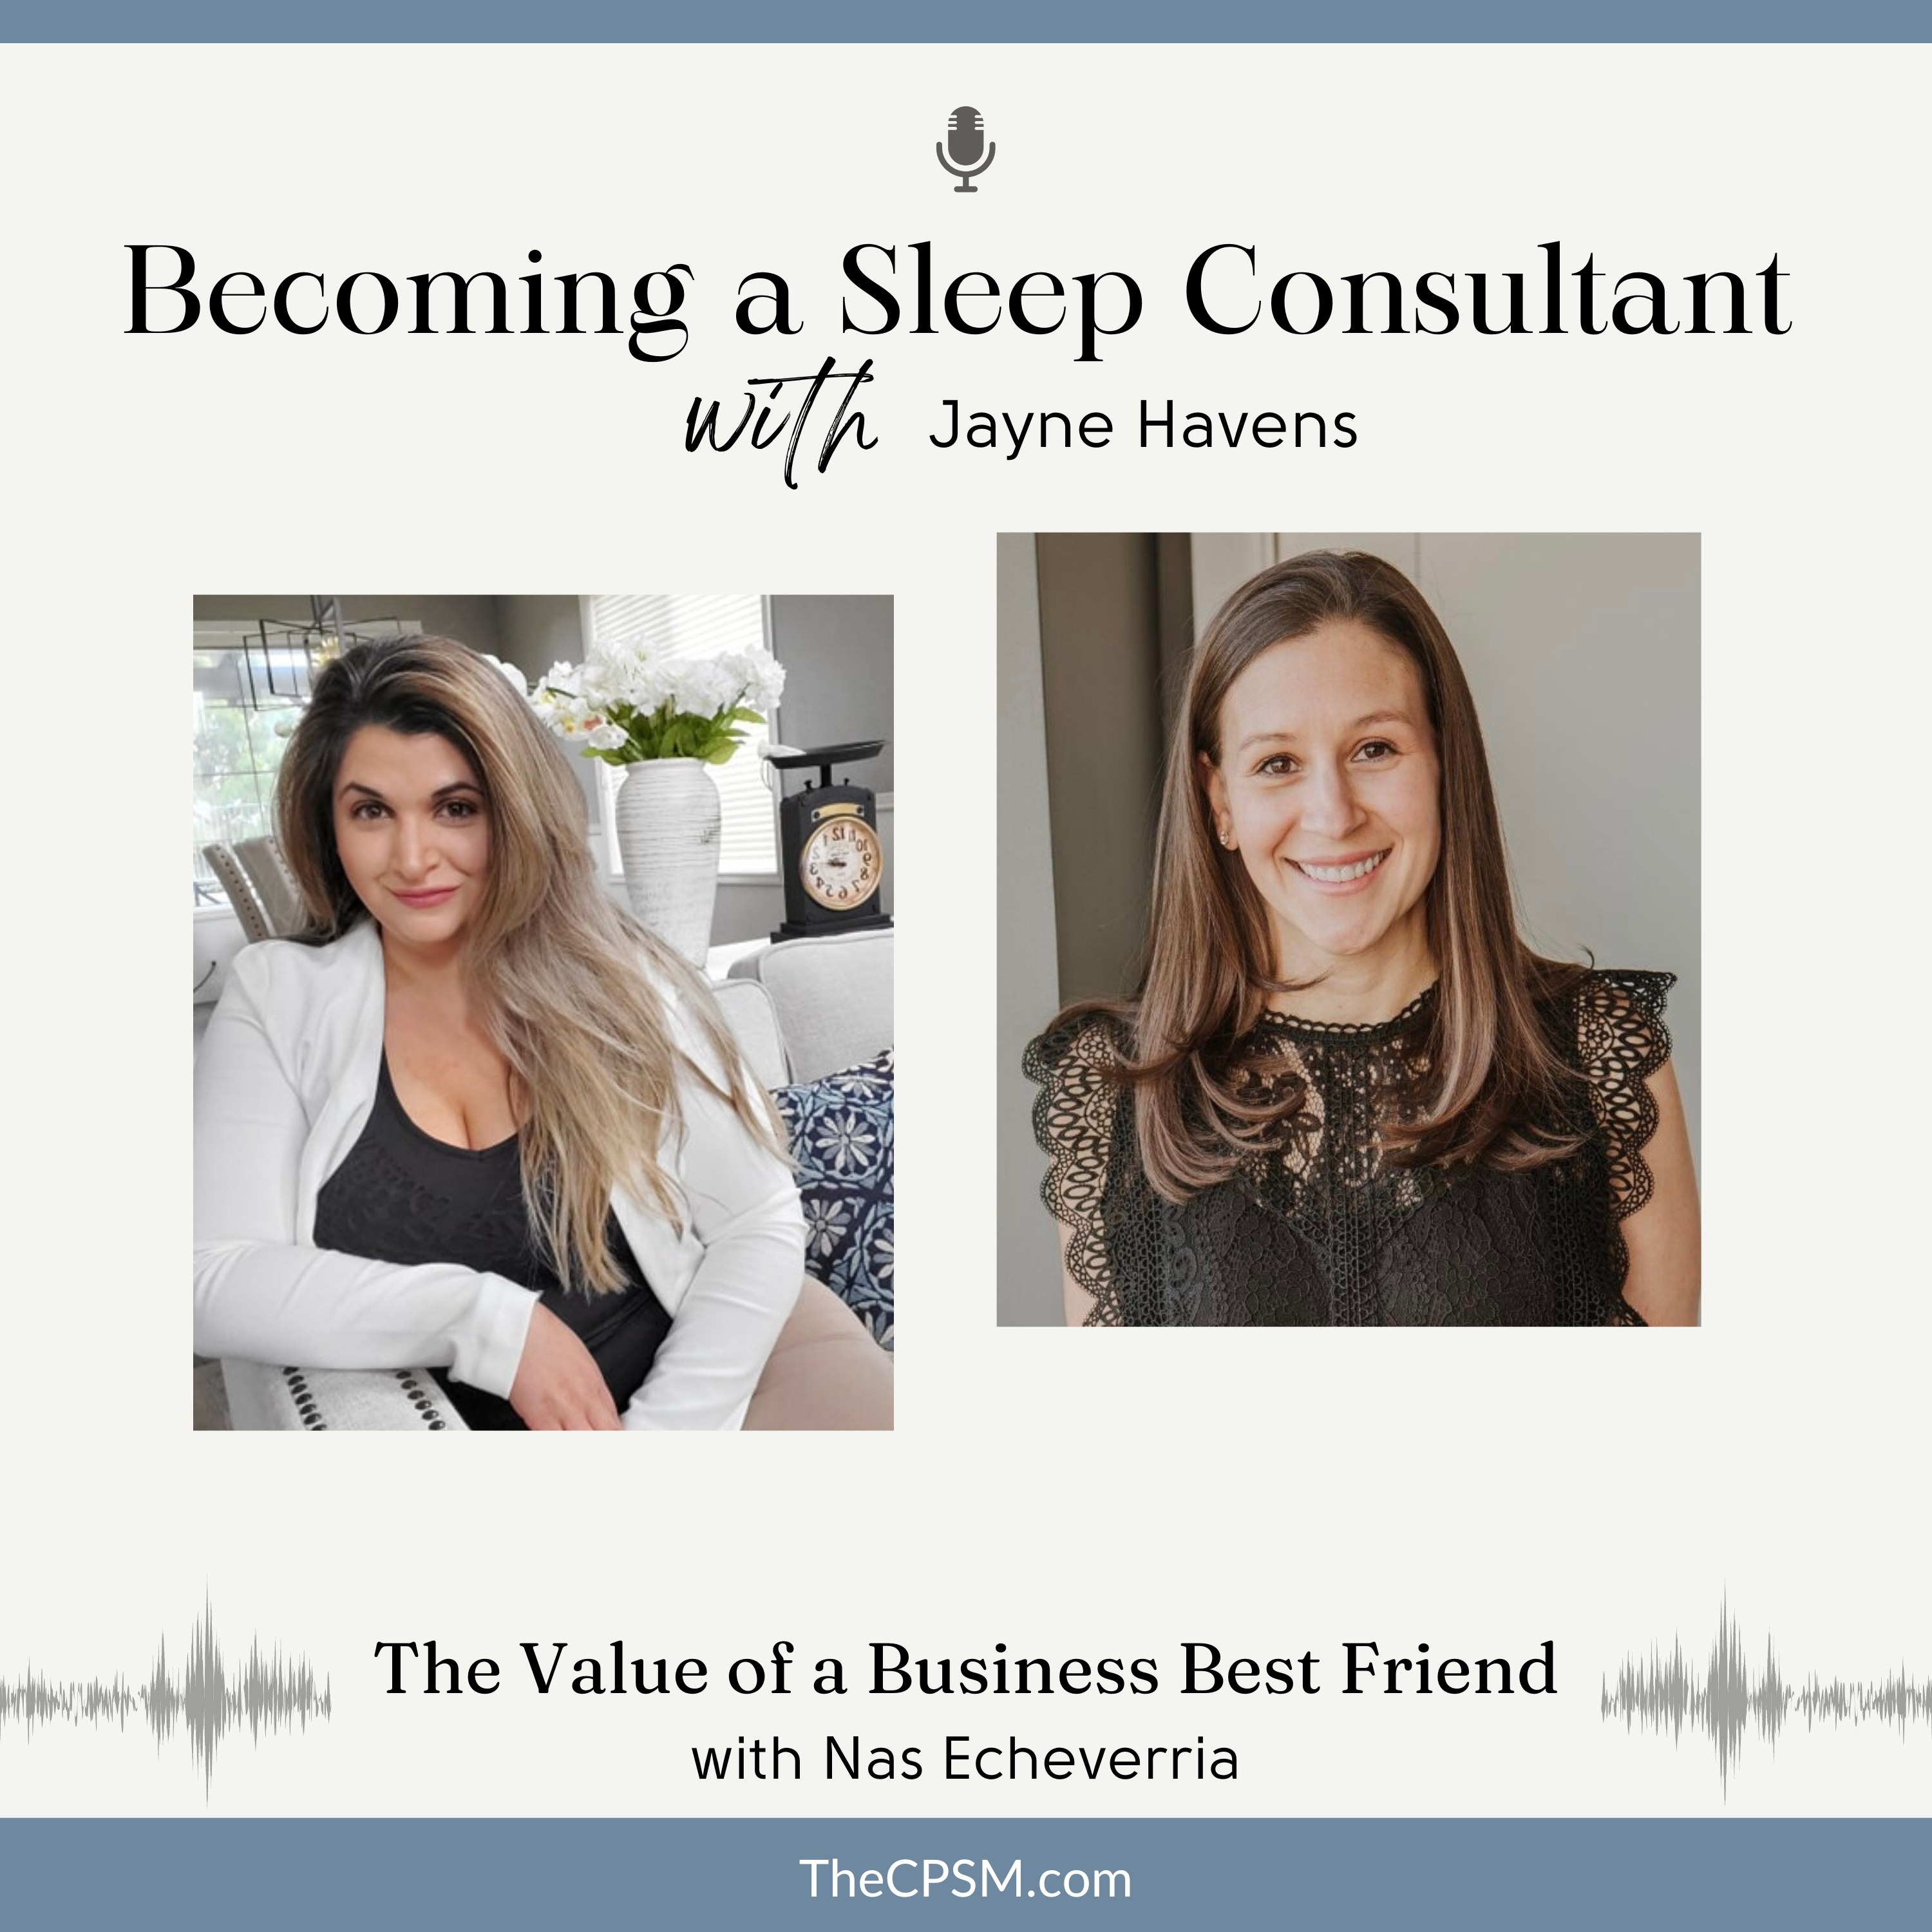 The Value of a Business Best Friend